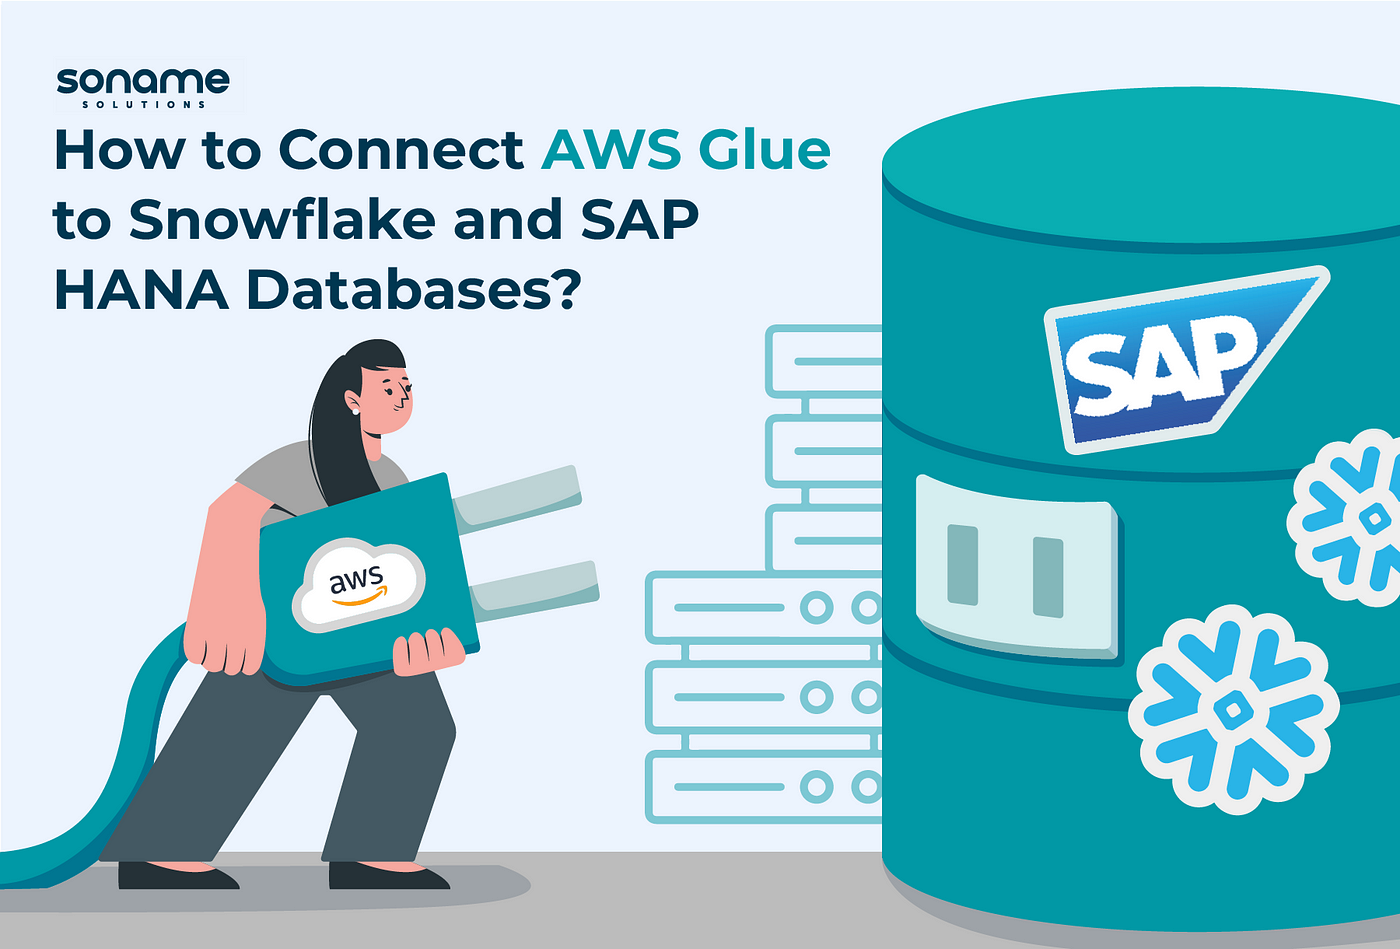 How to Connect AWS Glue to Snowflake and SAP HANA Databases | by Anatolii  Maslov | Soname Solutions